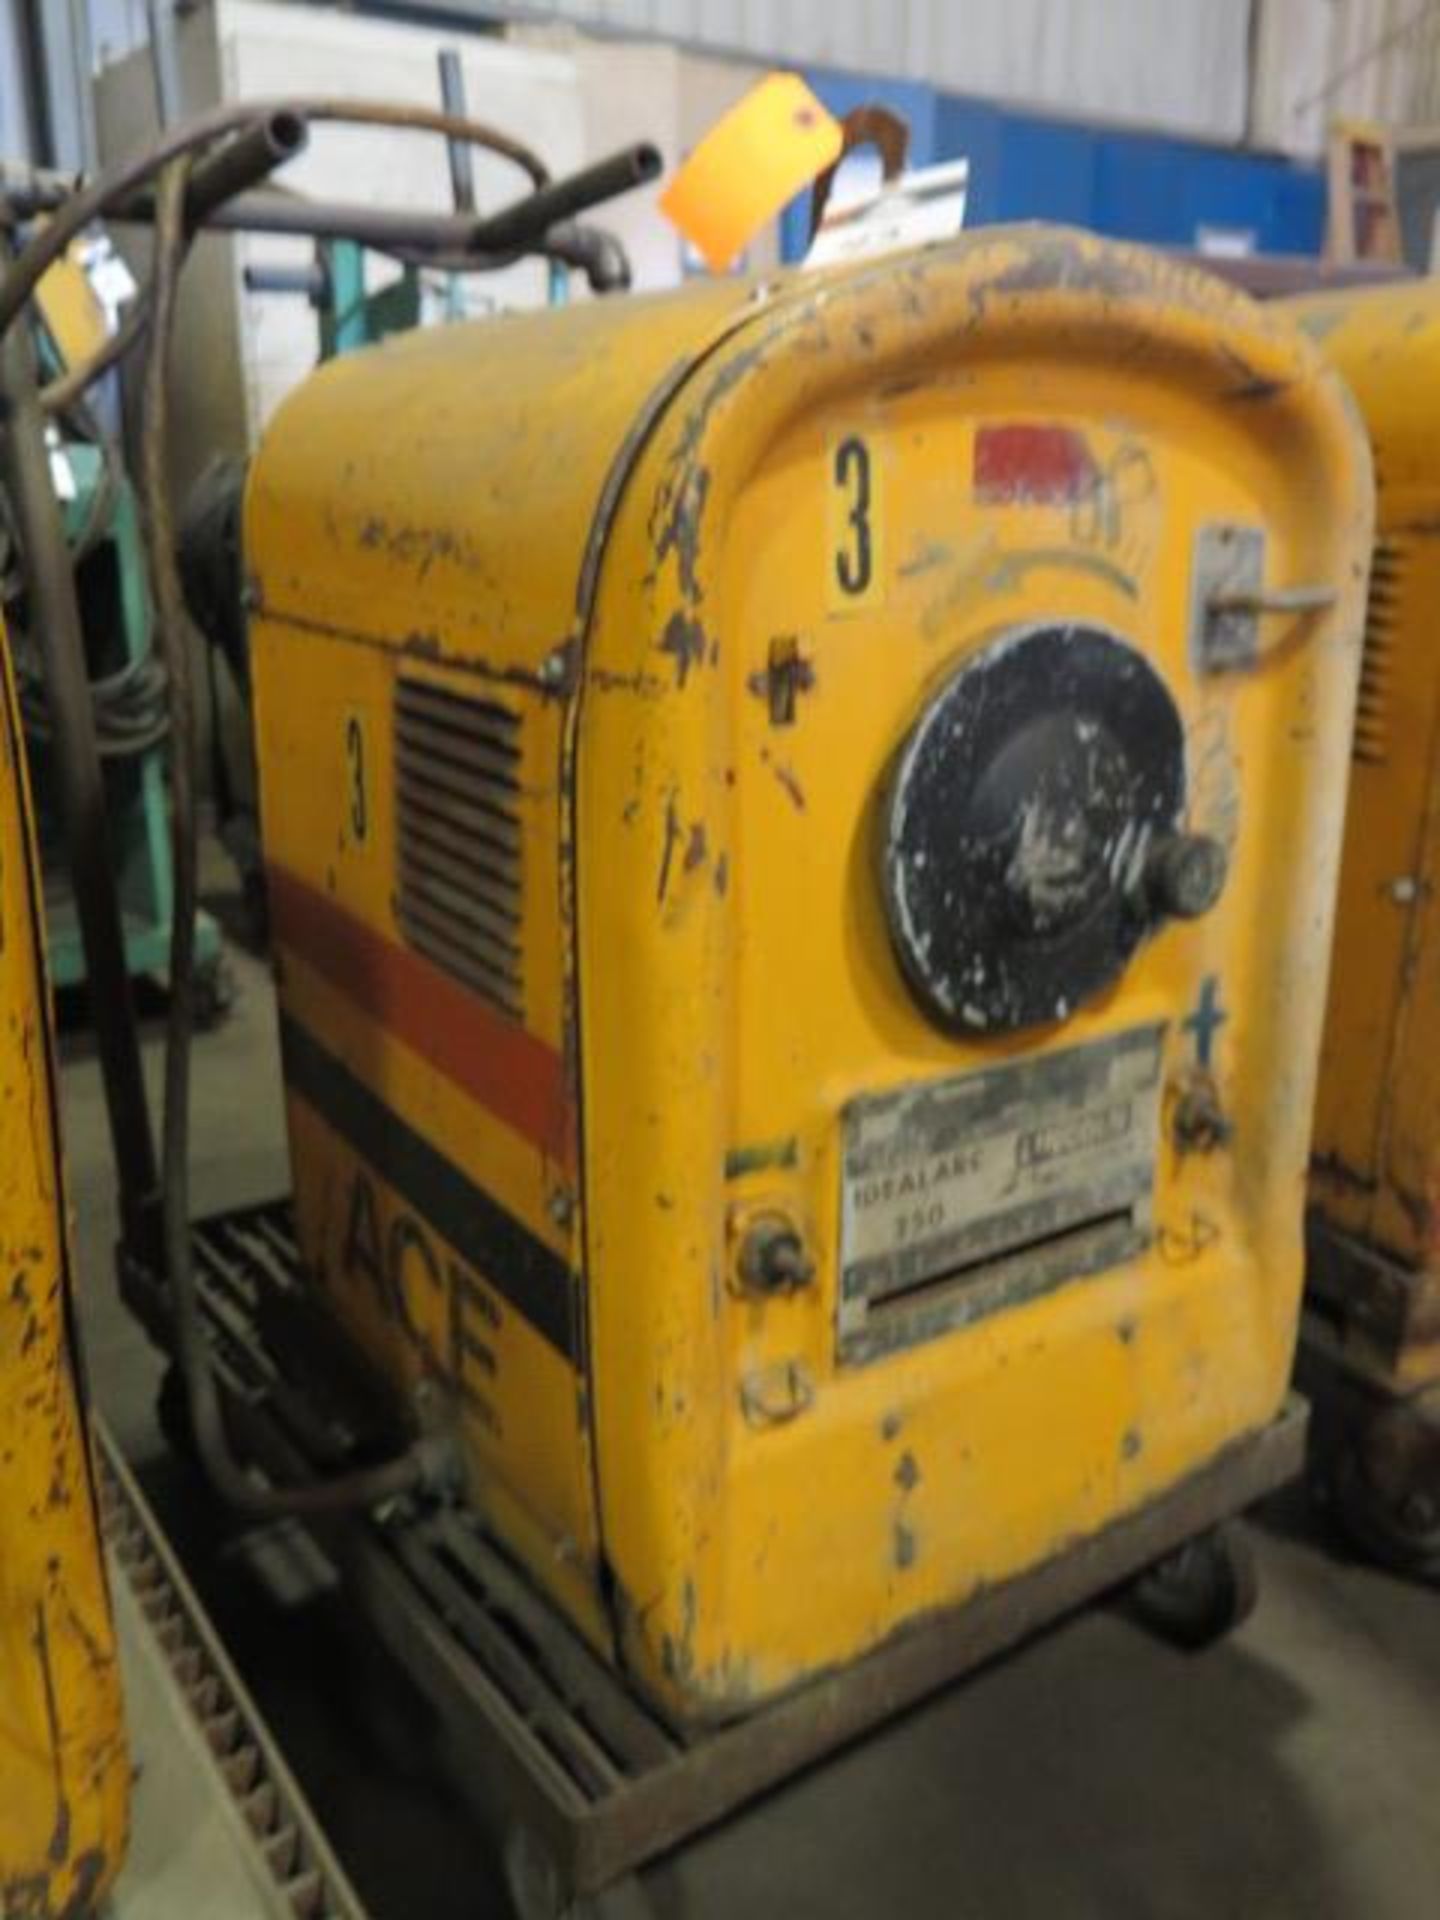 Lincoln Idealarc 250 Arc Welding Power Source (SOLD AS-IS - NO WARRANTY) - Image 2 of 11